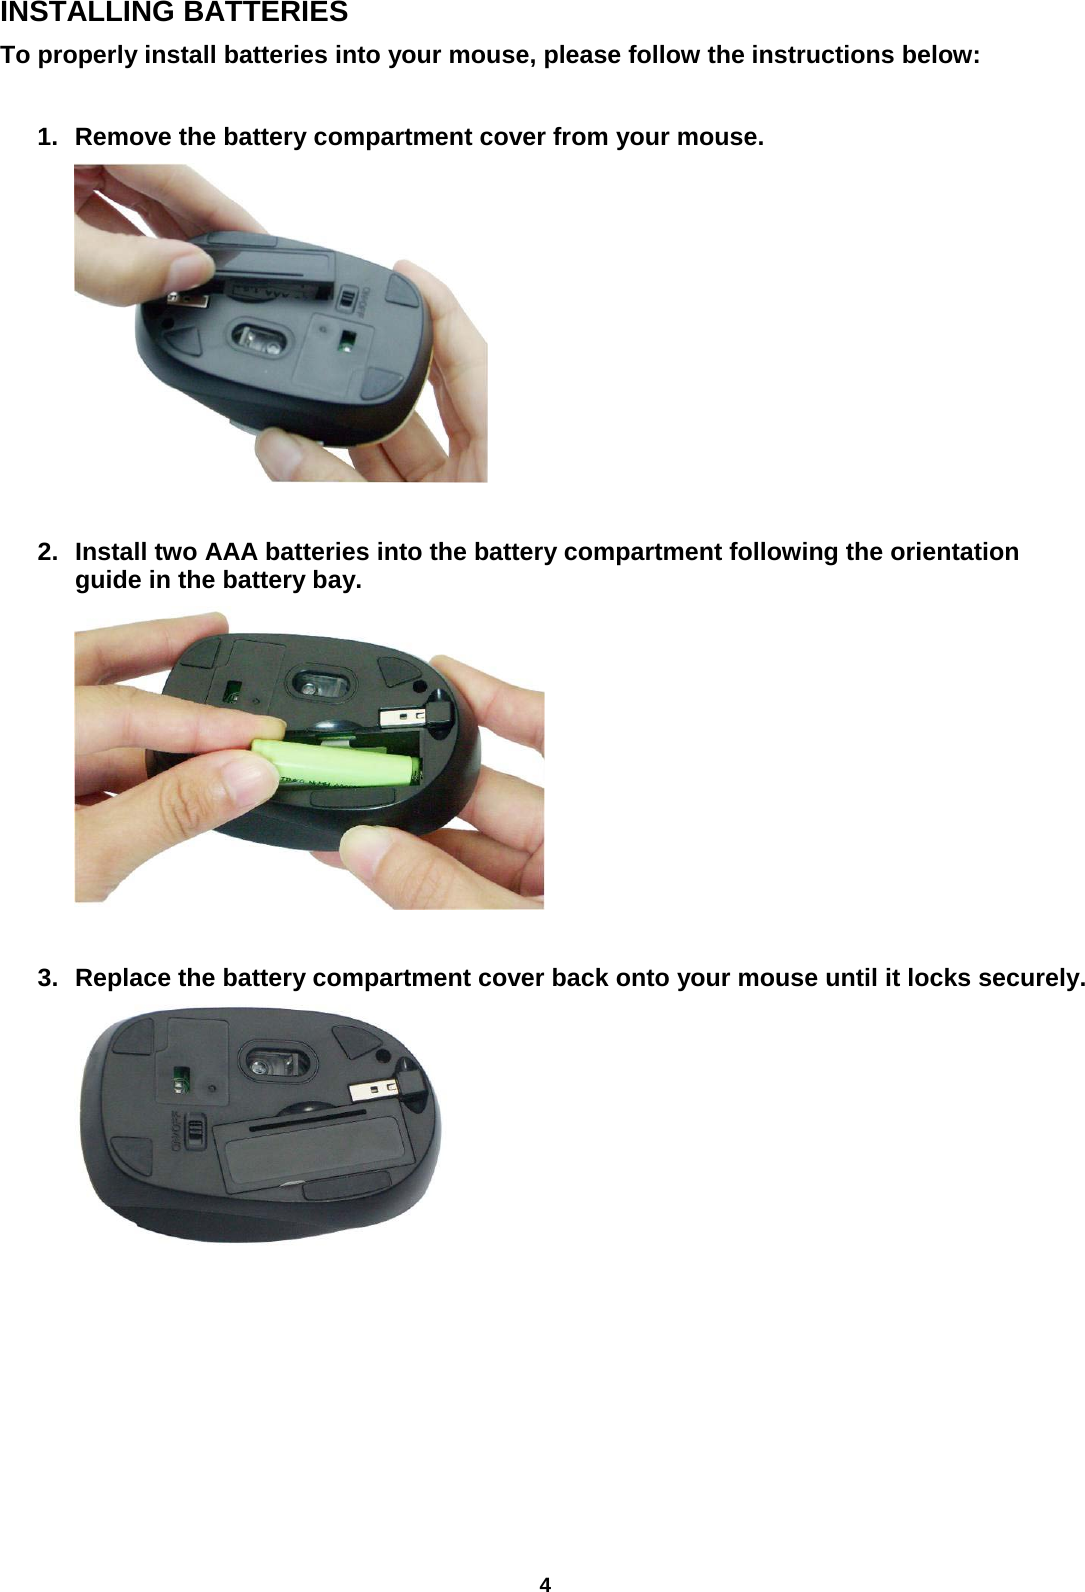 4 INSTALLING BATTERIES To properly install batteries into your mouse, please follow the instructions below:  1. Remove the battery compartment cover from your mouse.        2. Install two AAA batteries into the battery compartment following the orientation guide in the battery bay.       3. Replace the battery compartment cover back onto your mouse until it locks securely.         